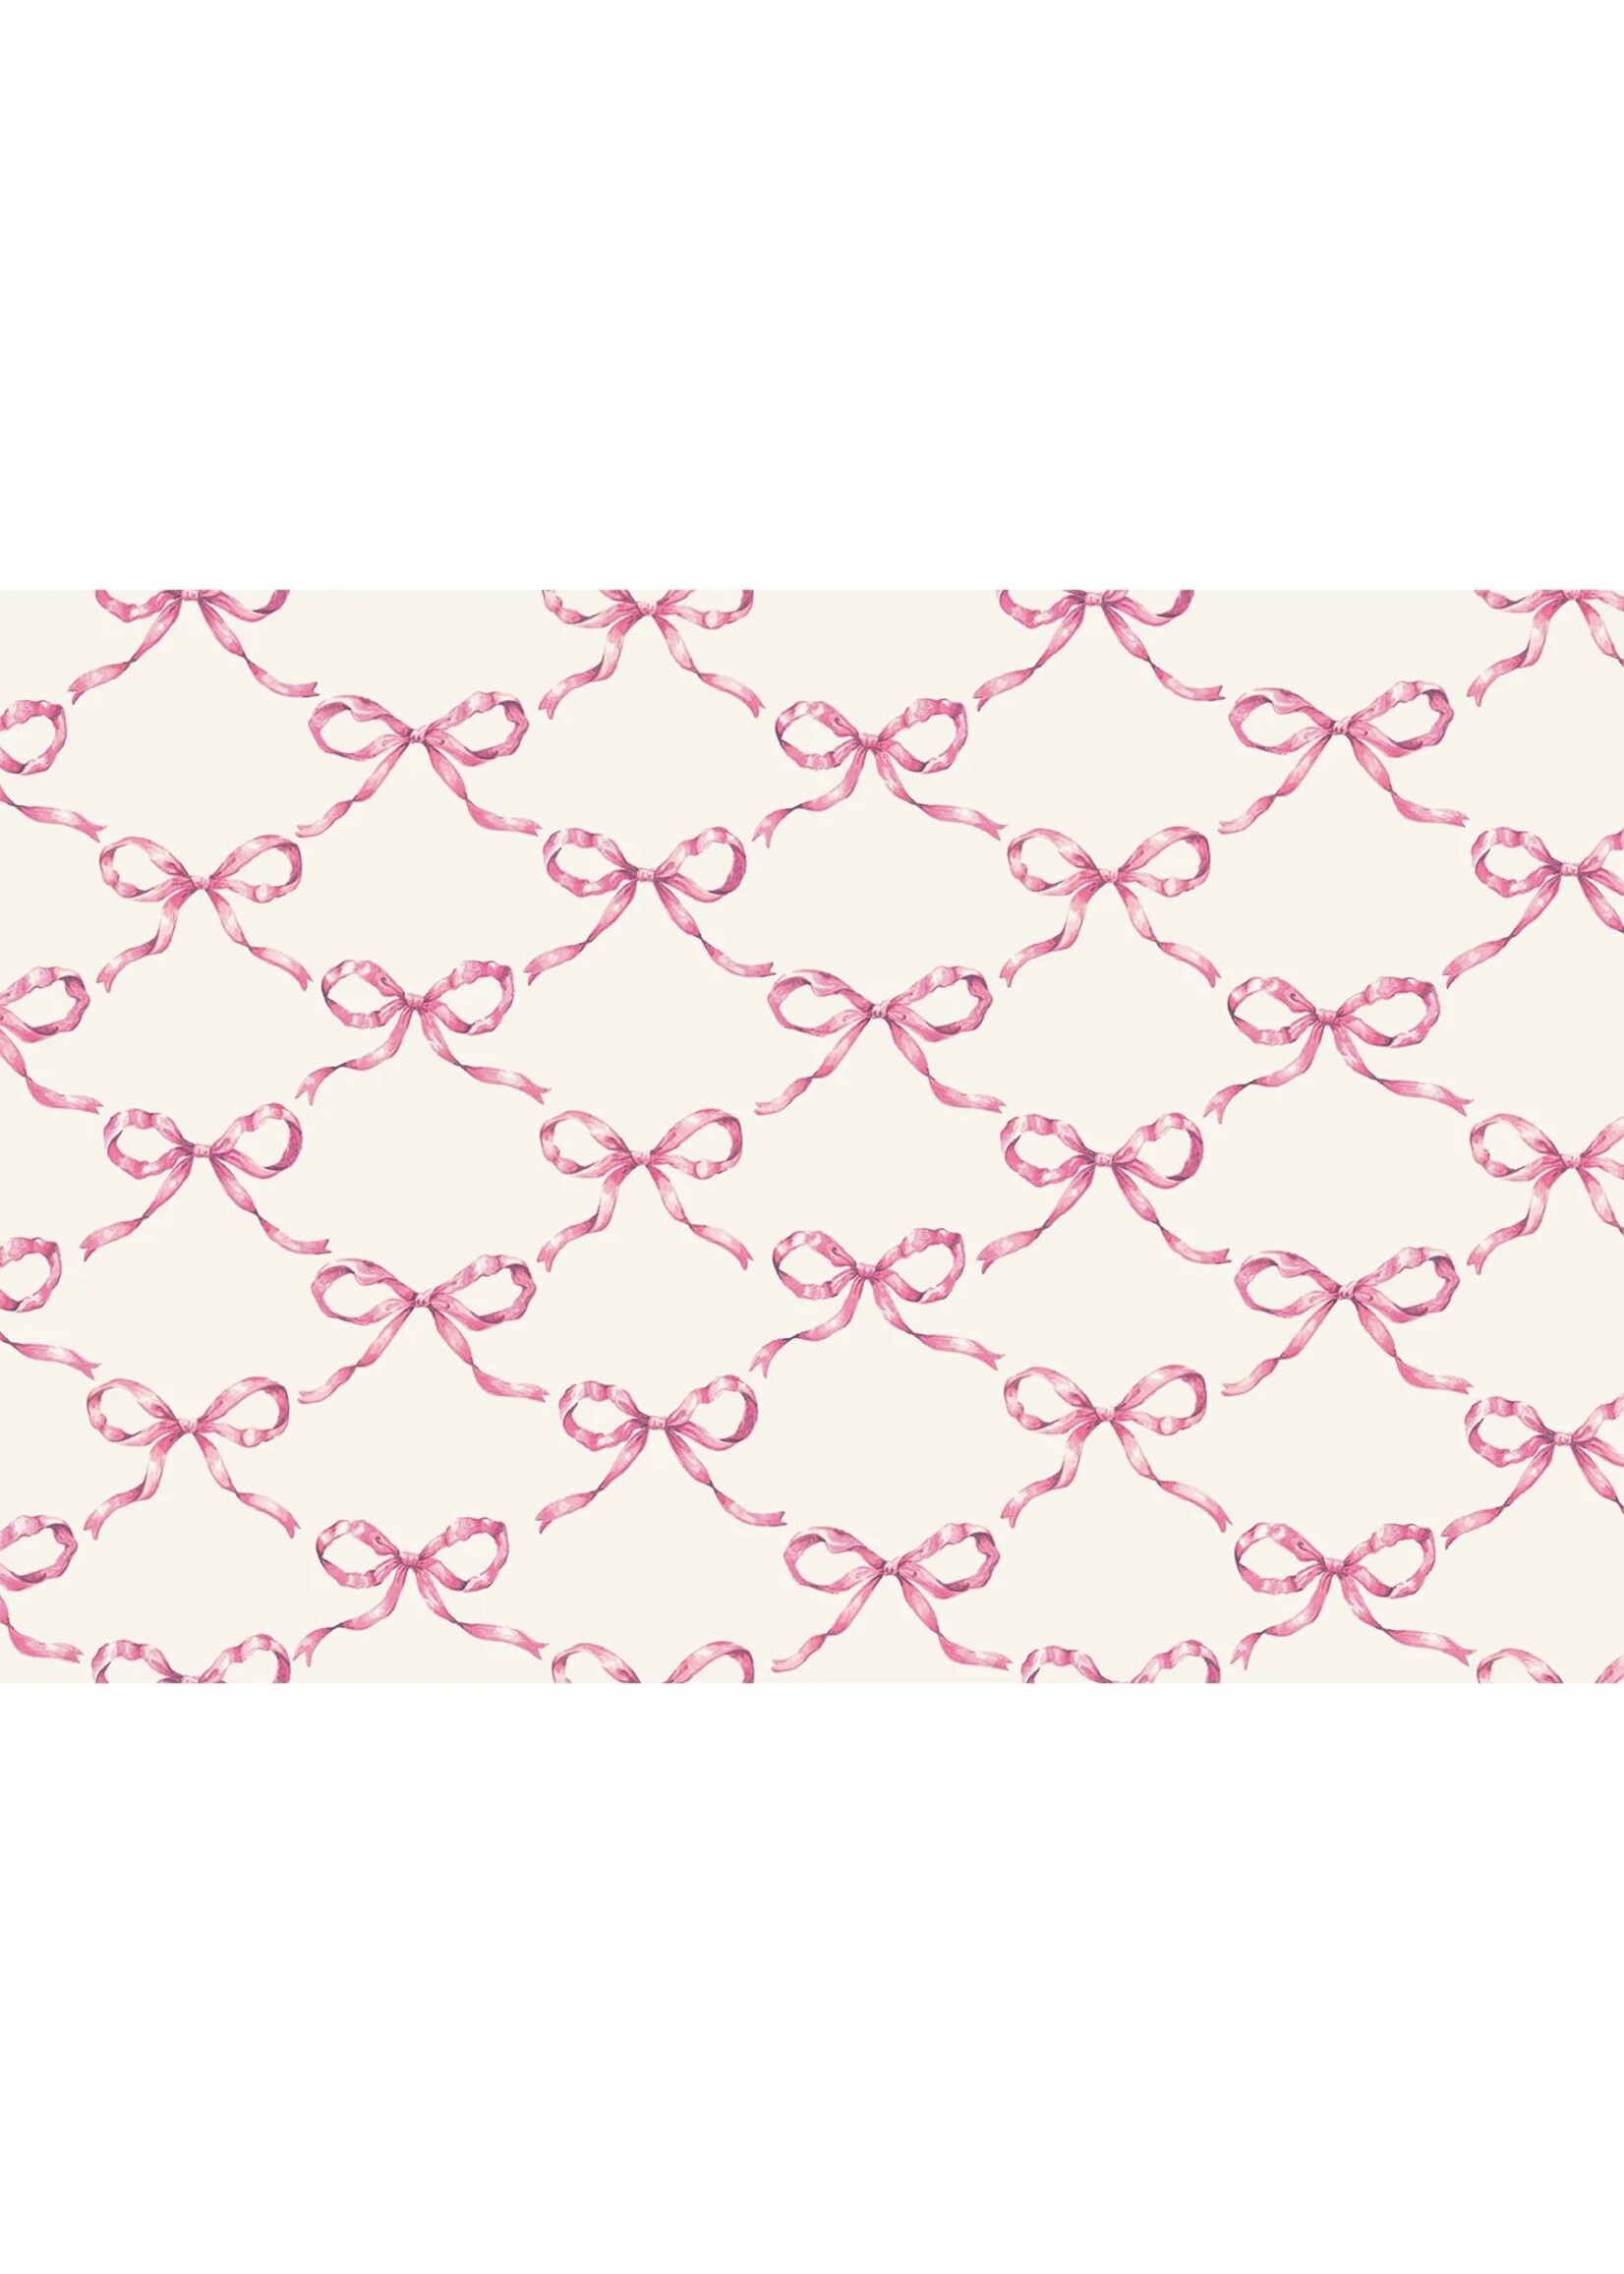 Hester & Cook Paper Placemats - Pink Bow Lattice (24 sheets)